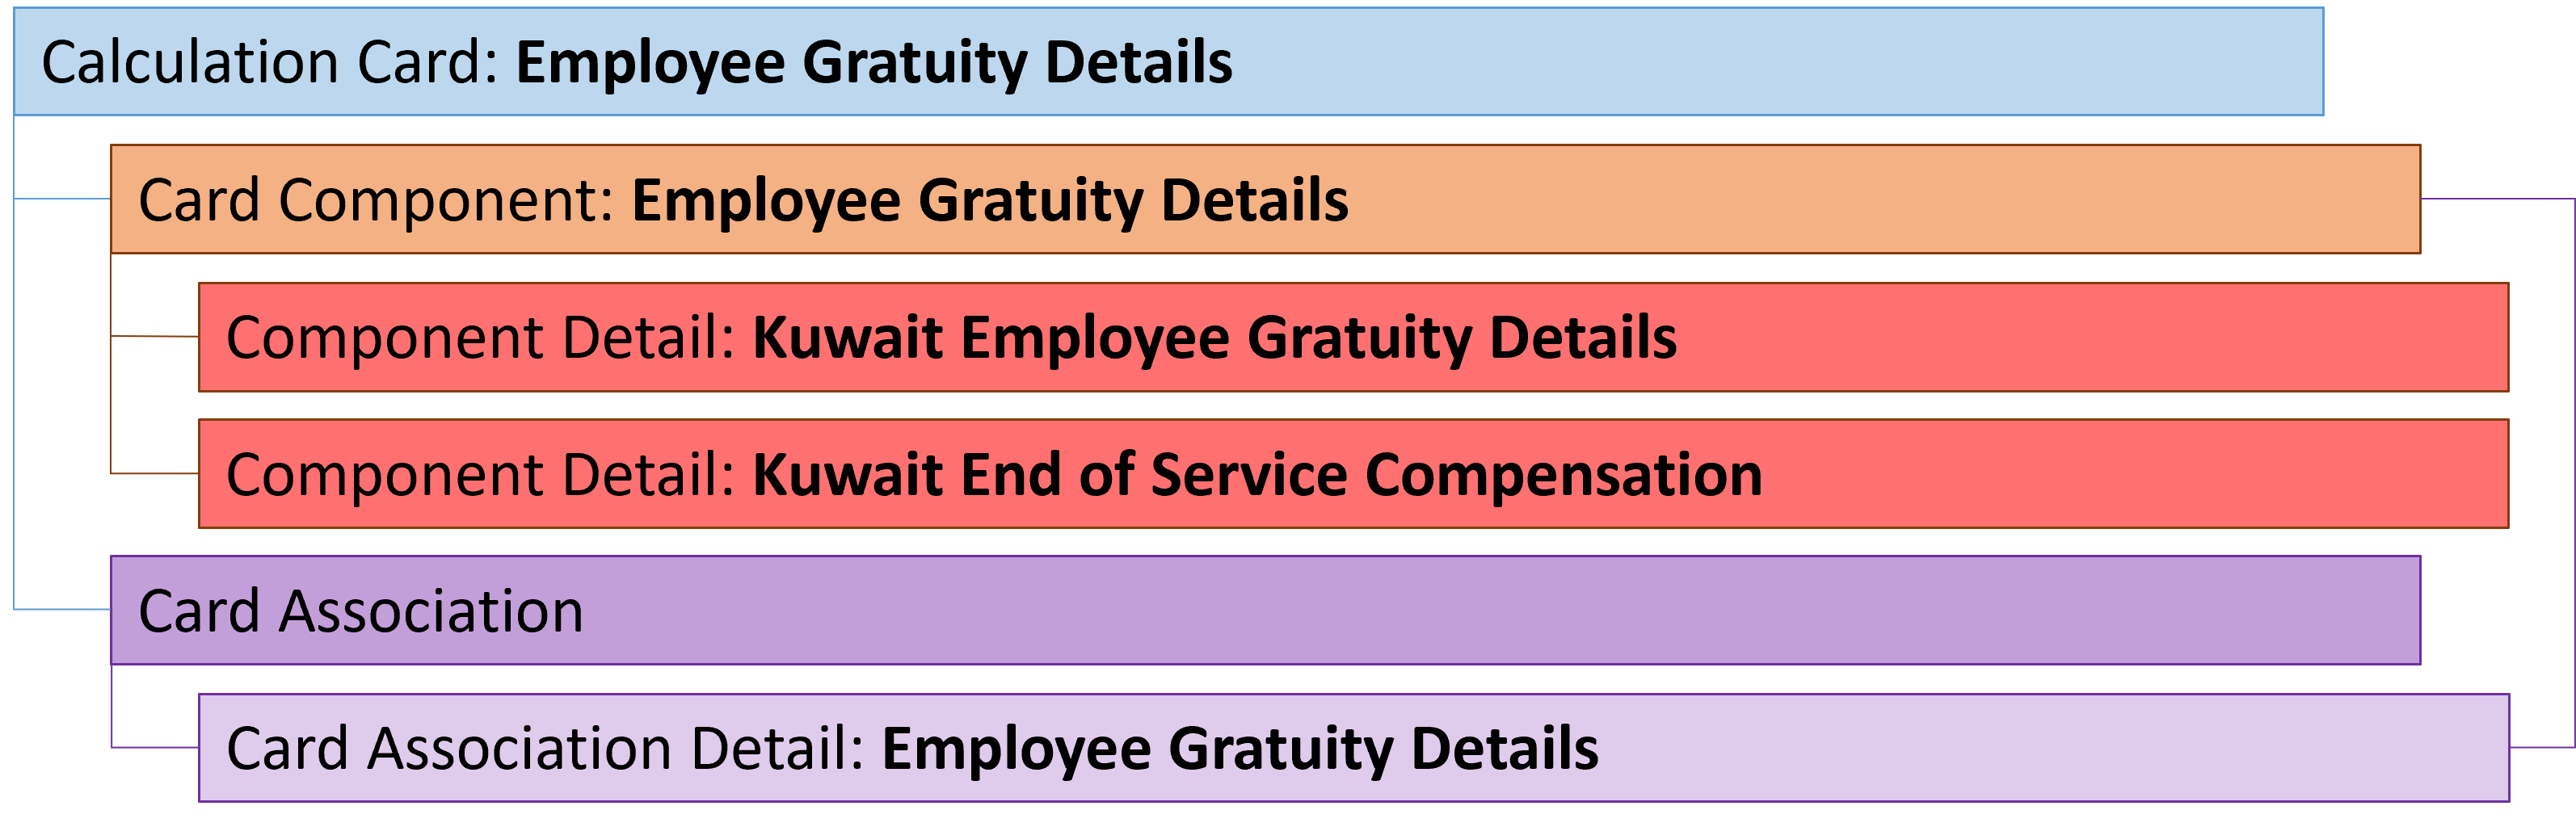 kw employee gratuity details card hierarchy